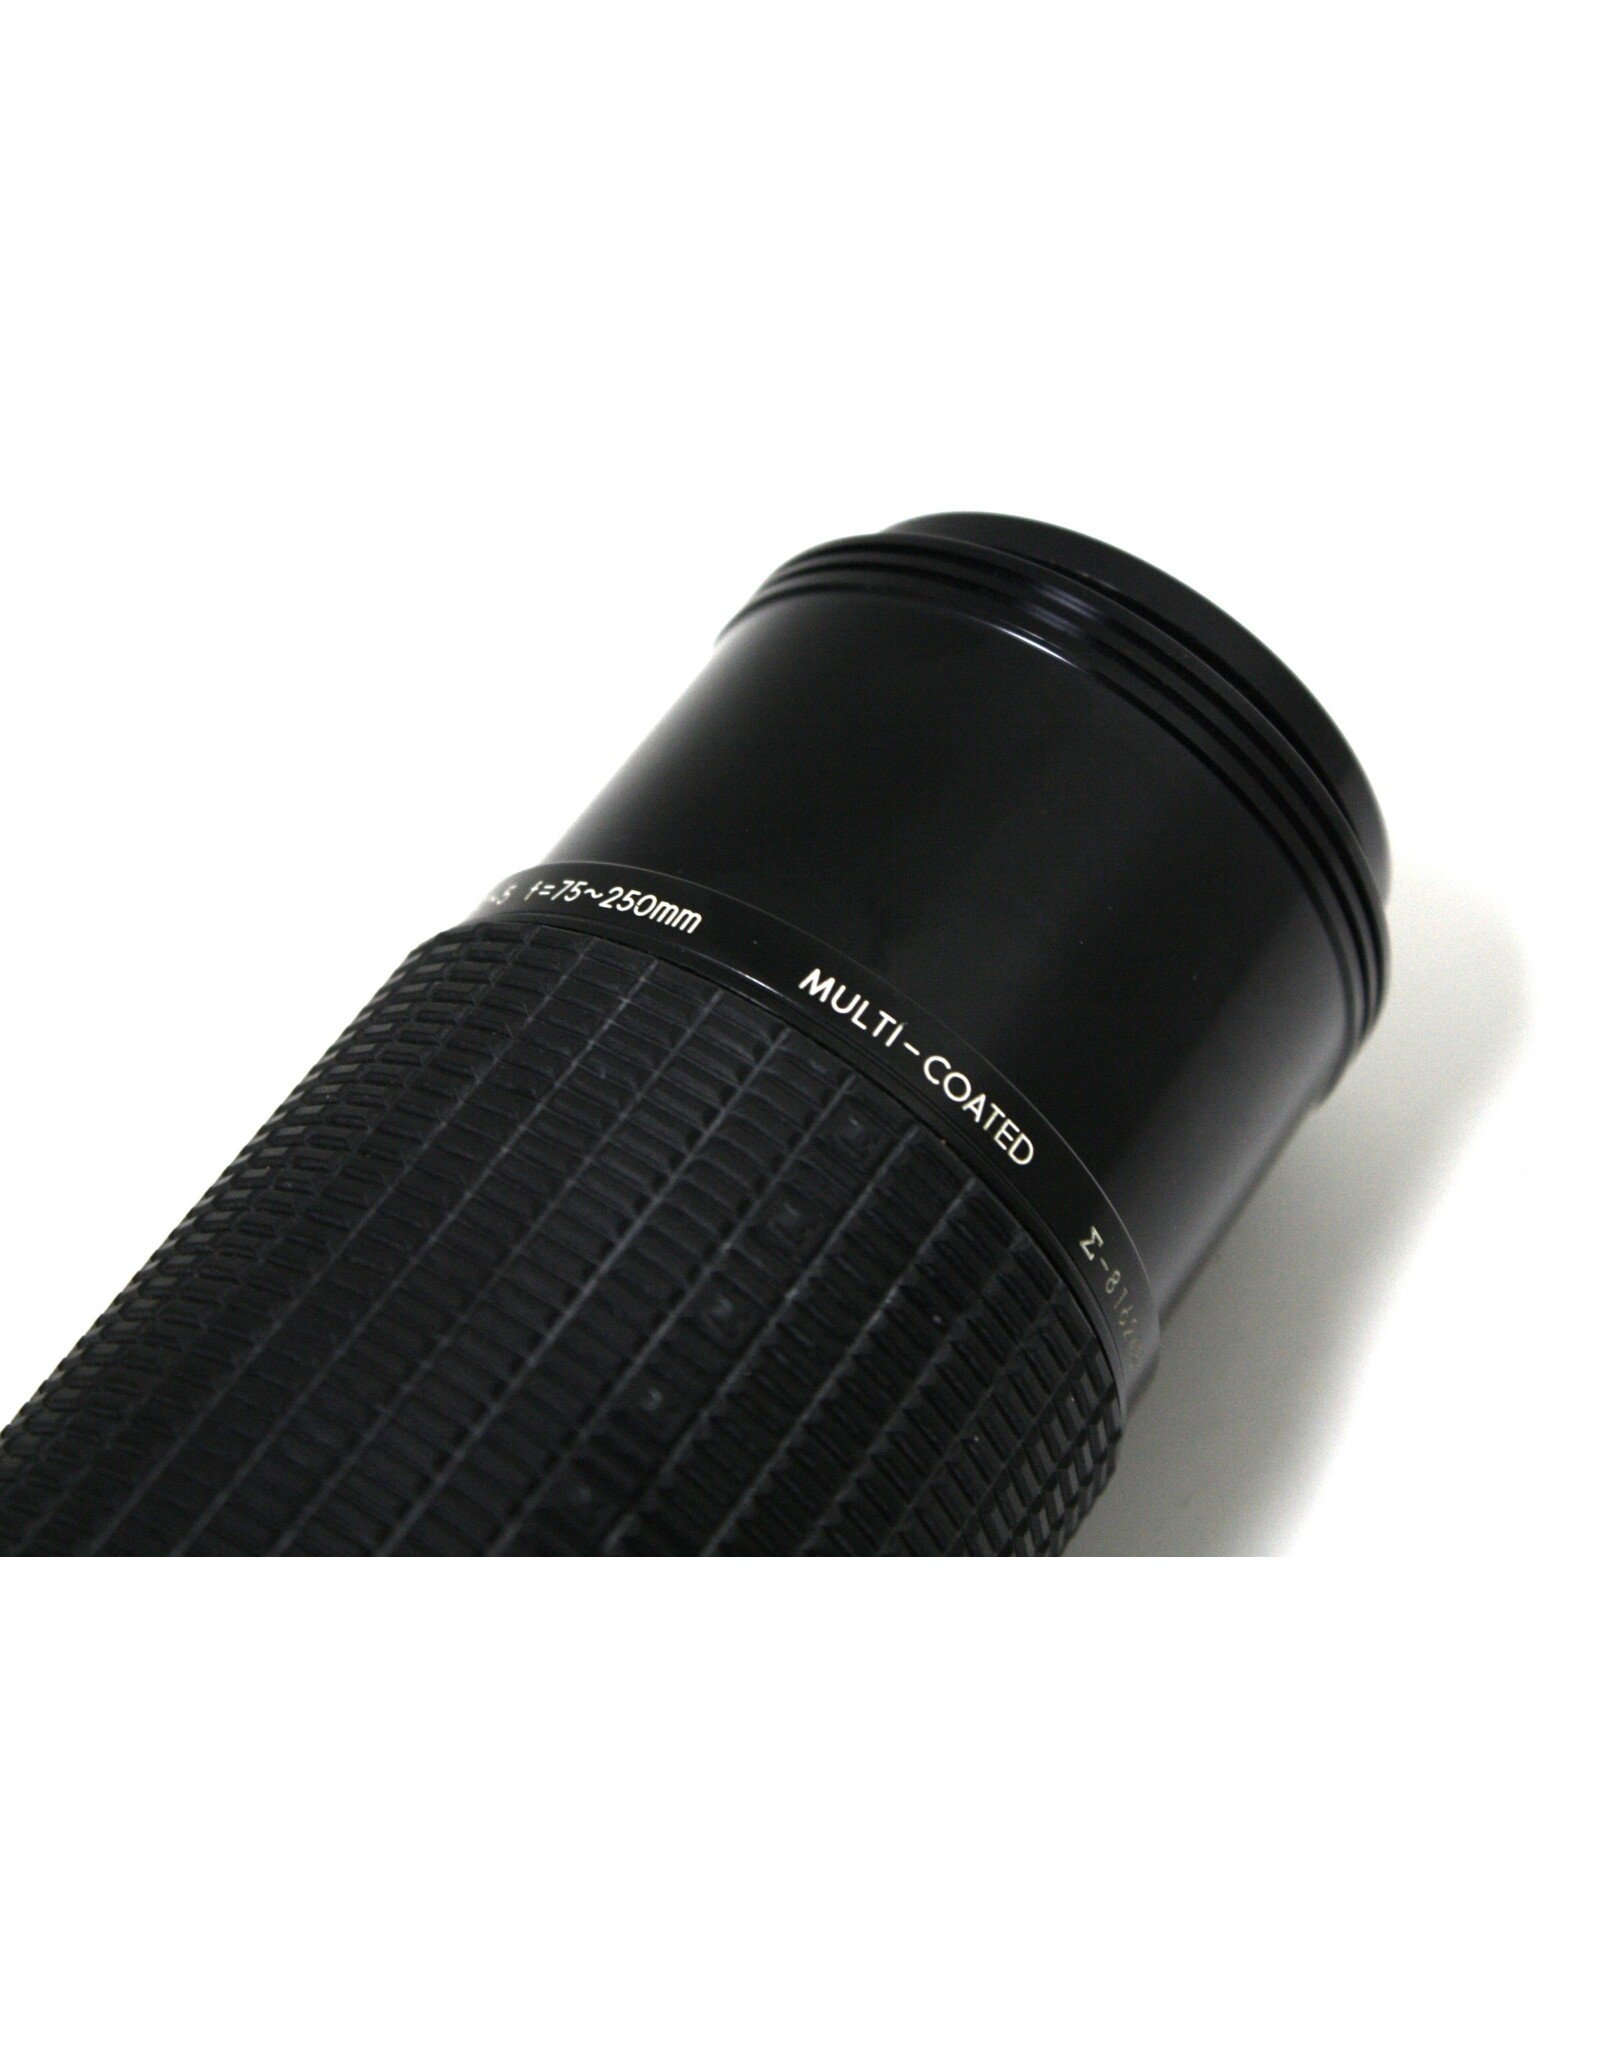 Sigma Sigma 75-250mm Manual Focus f4-5 Lens for Minolta MD Mount (Pre-owned)